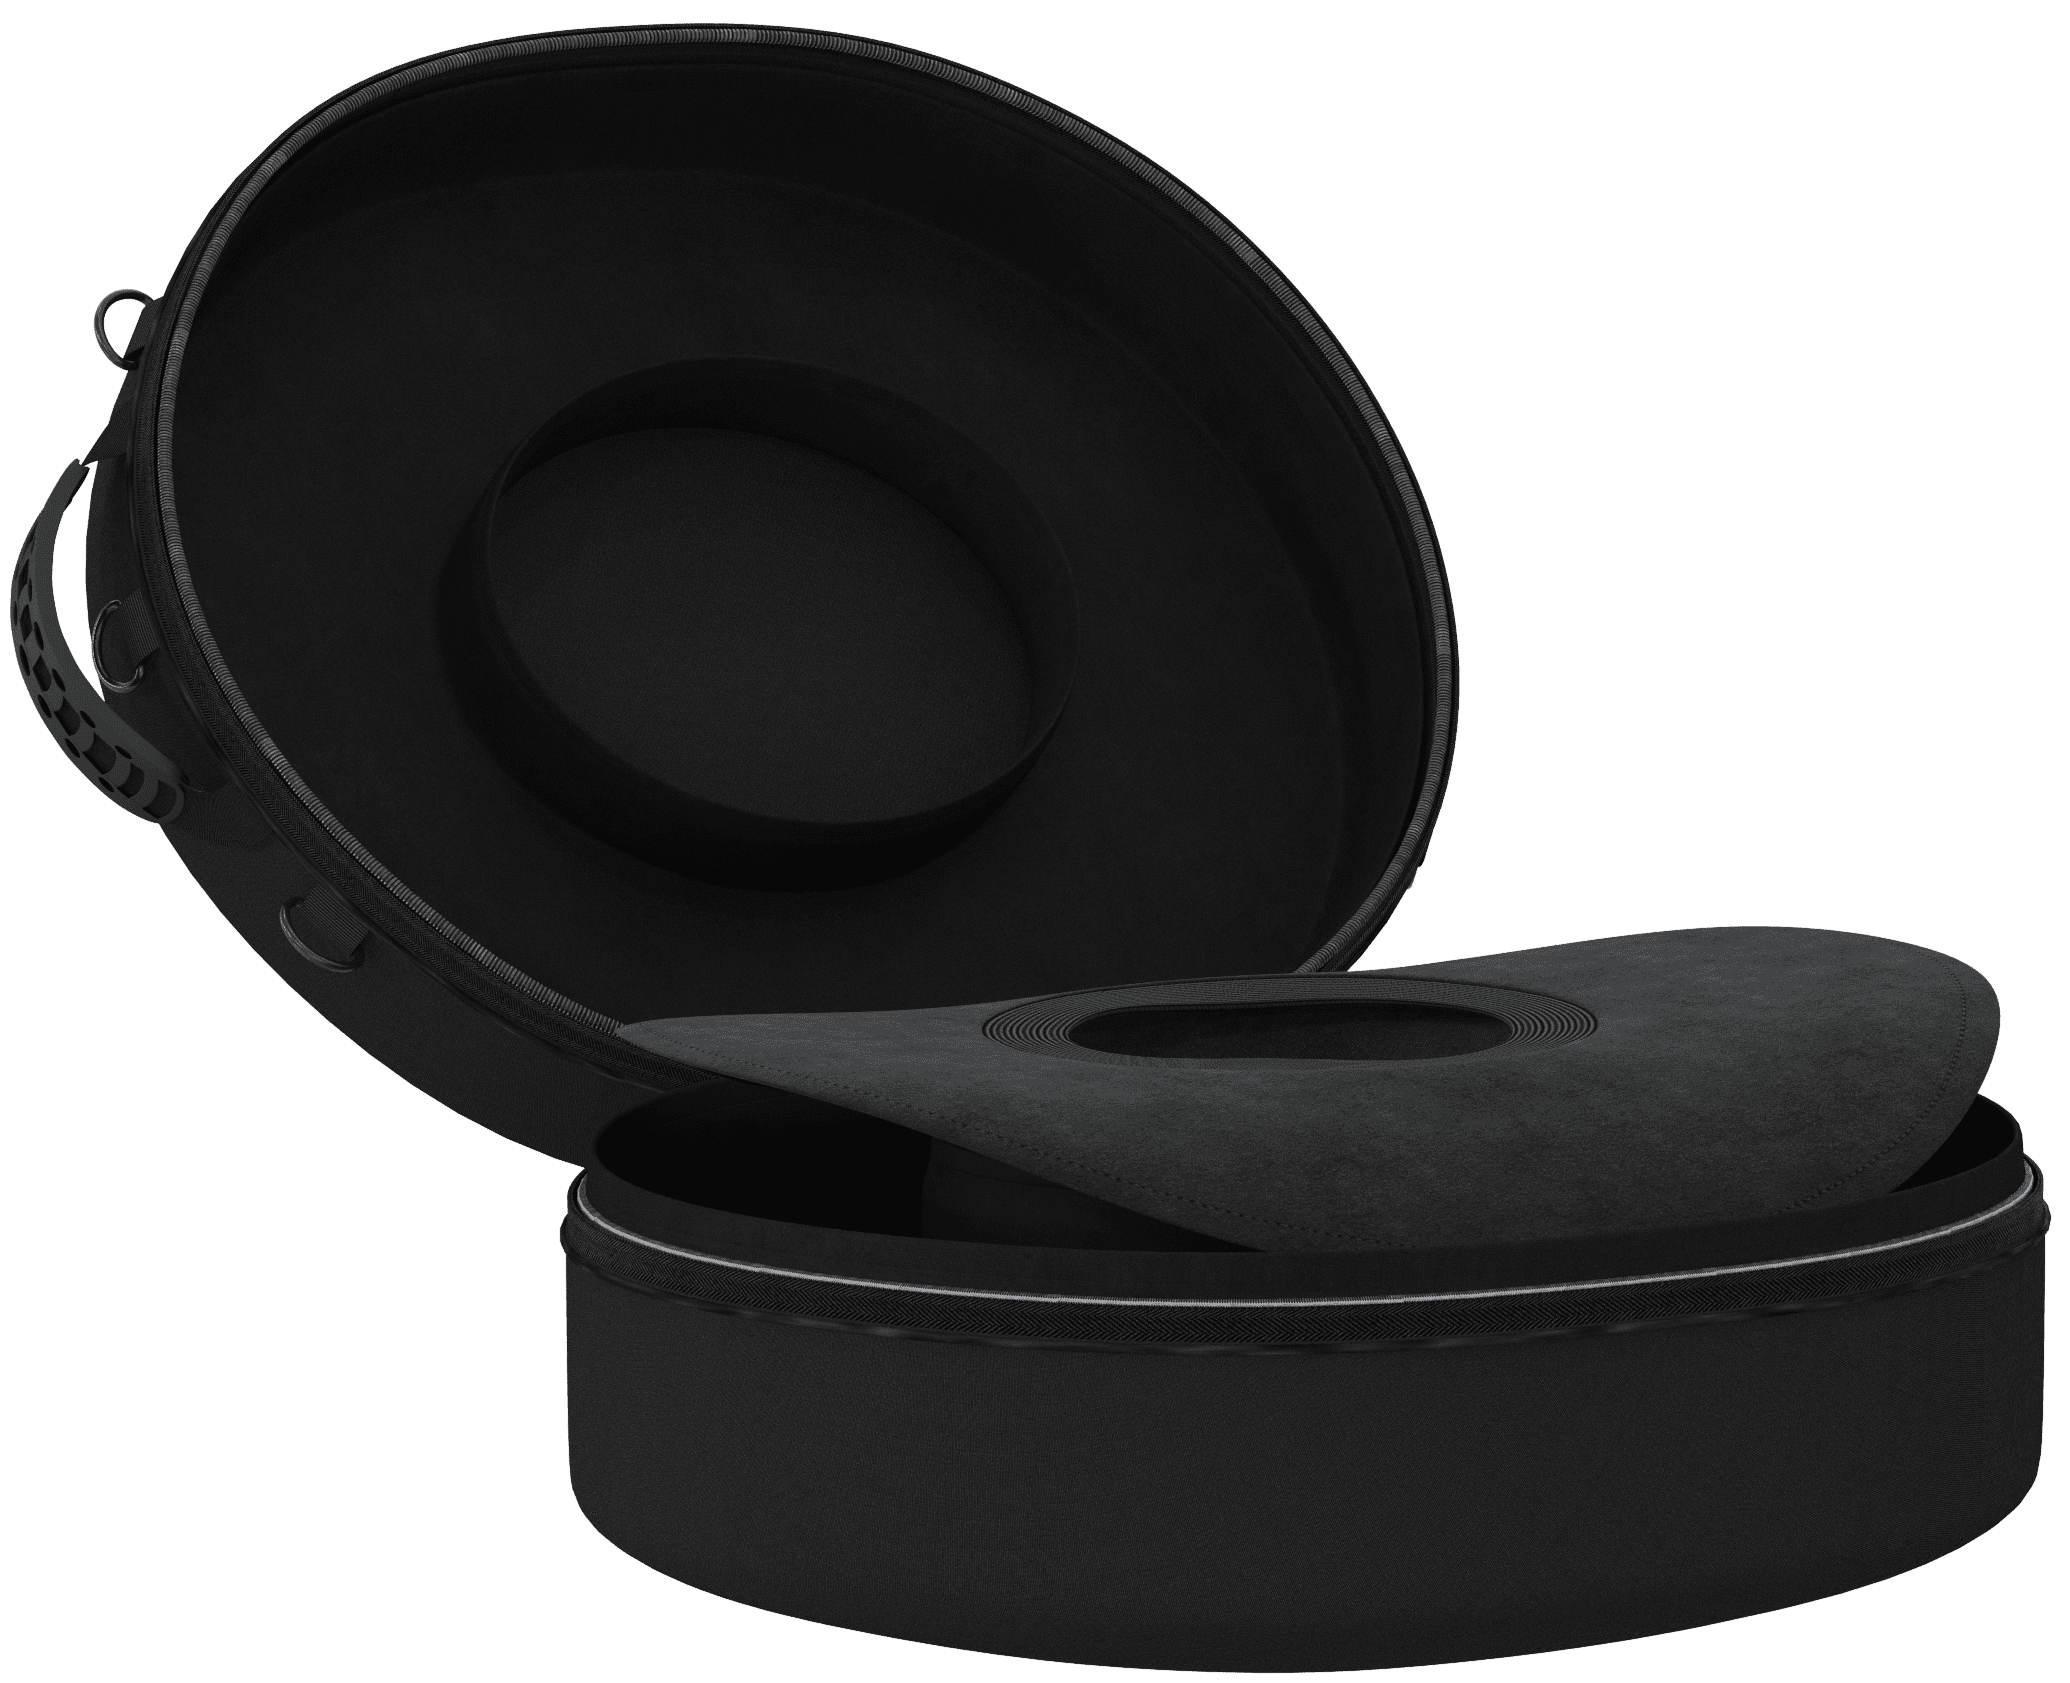 Casematix Cowboy Hat Box and Portable Cowboy Hat Storage for Brims Up to 4.75 inch - Hard Shell Cowboy Hat Case with Adjustable Carry Strap, Luggage